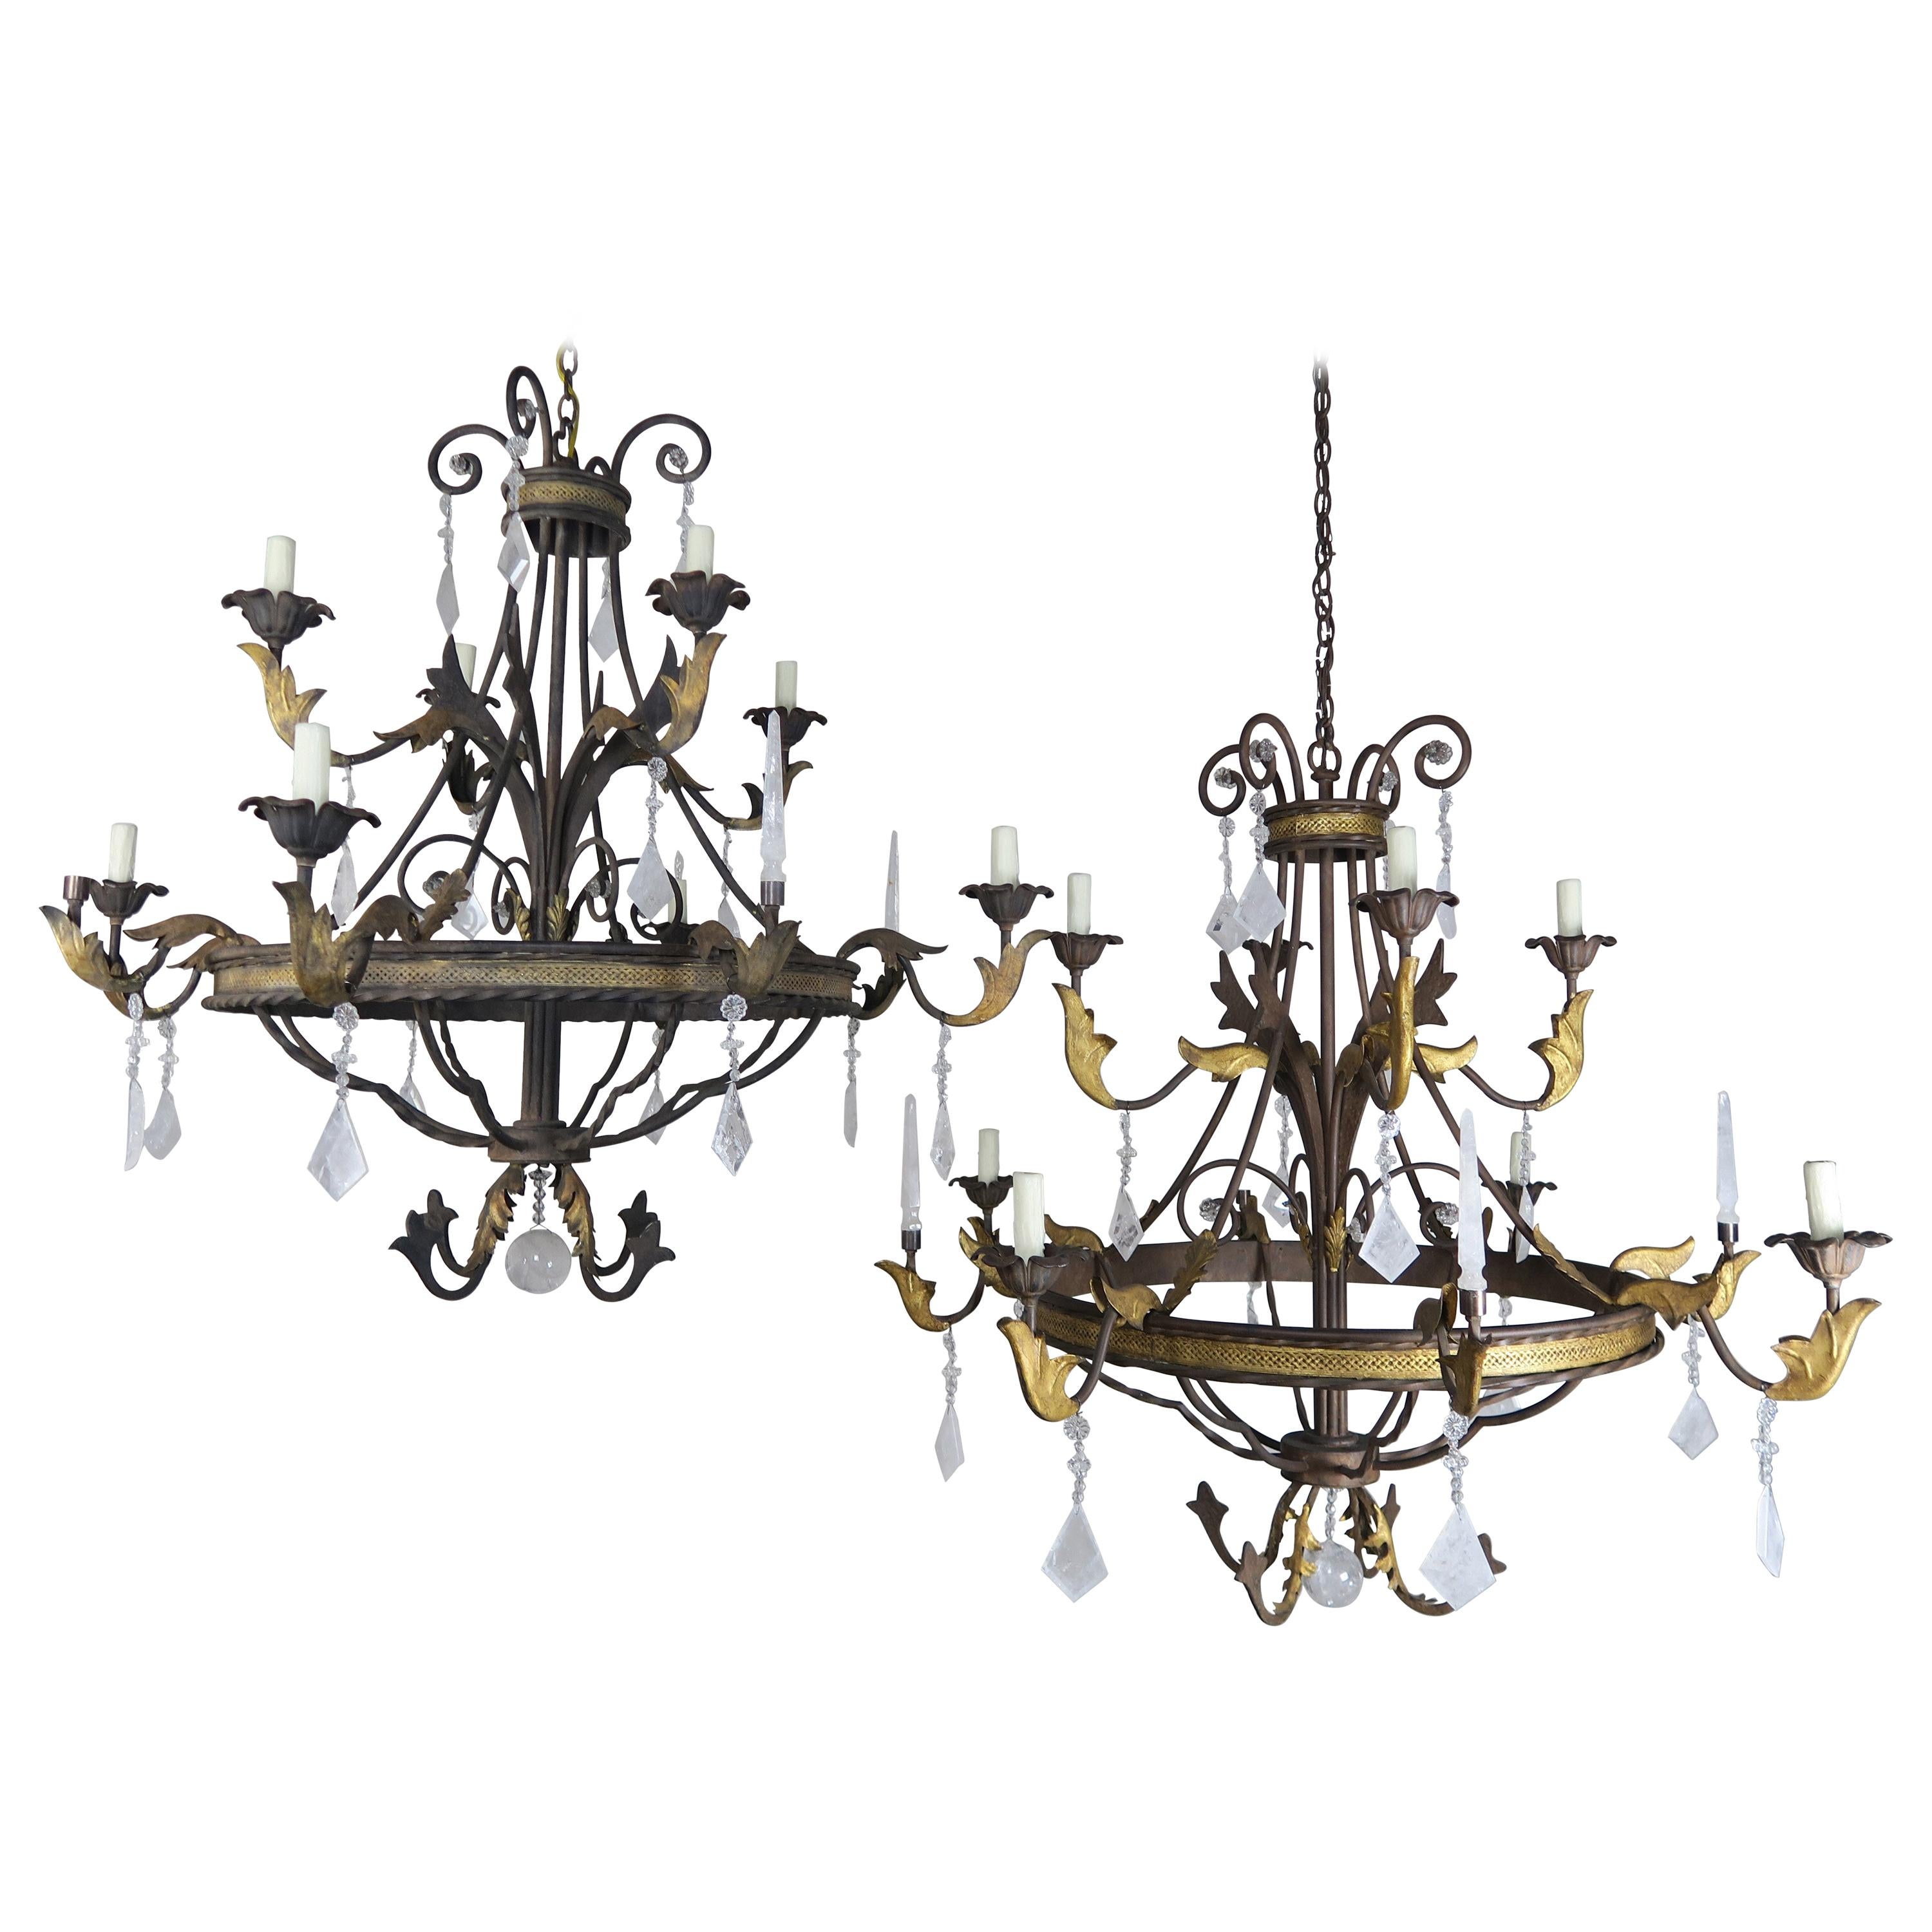 8-Light Spanish Baroque Style Rock Crystal Chandeliers, Pair